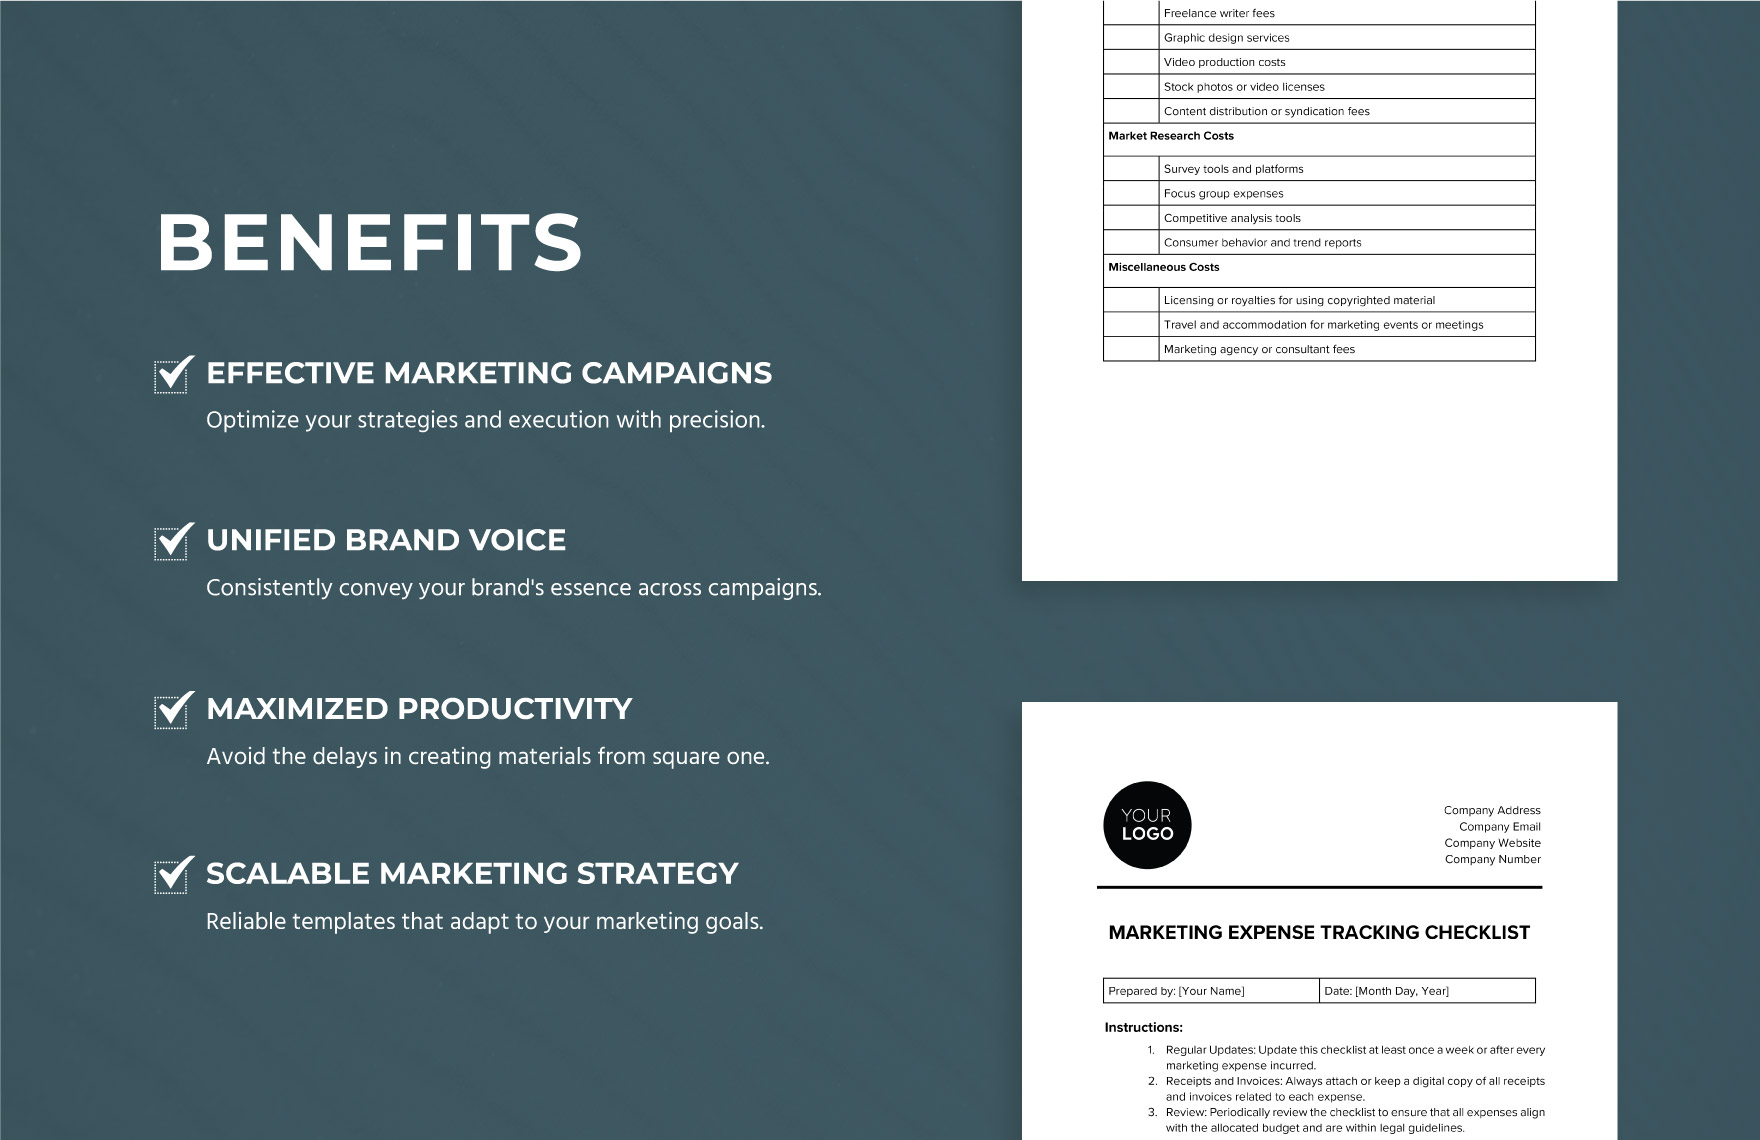 Marketing Expense Tracking Checklist Template